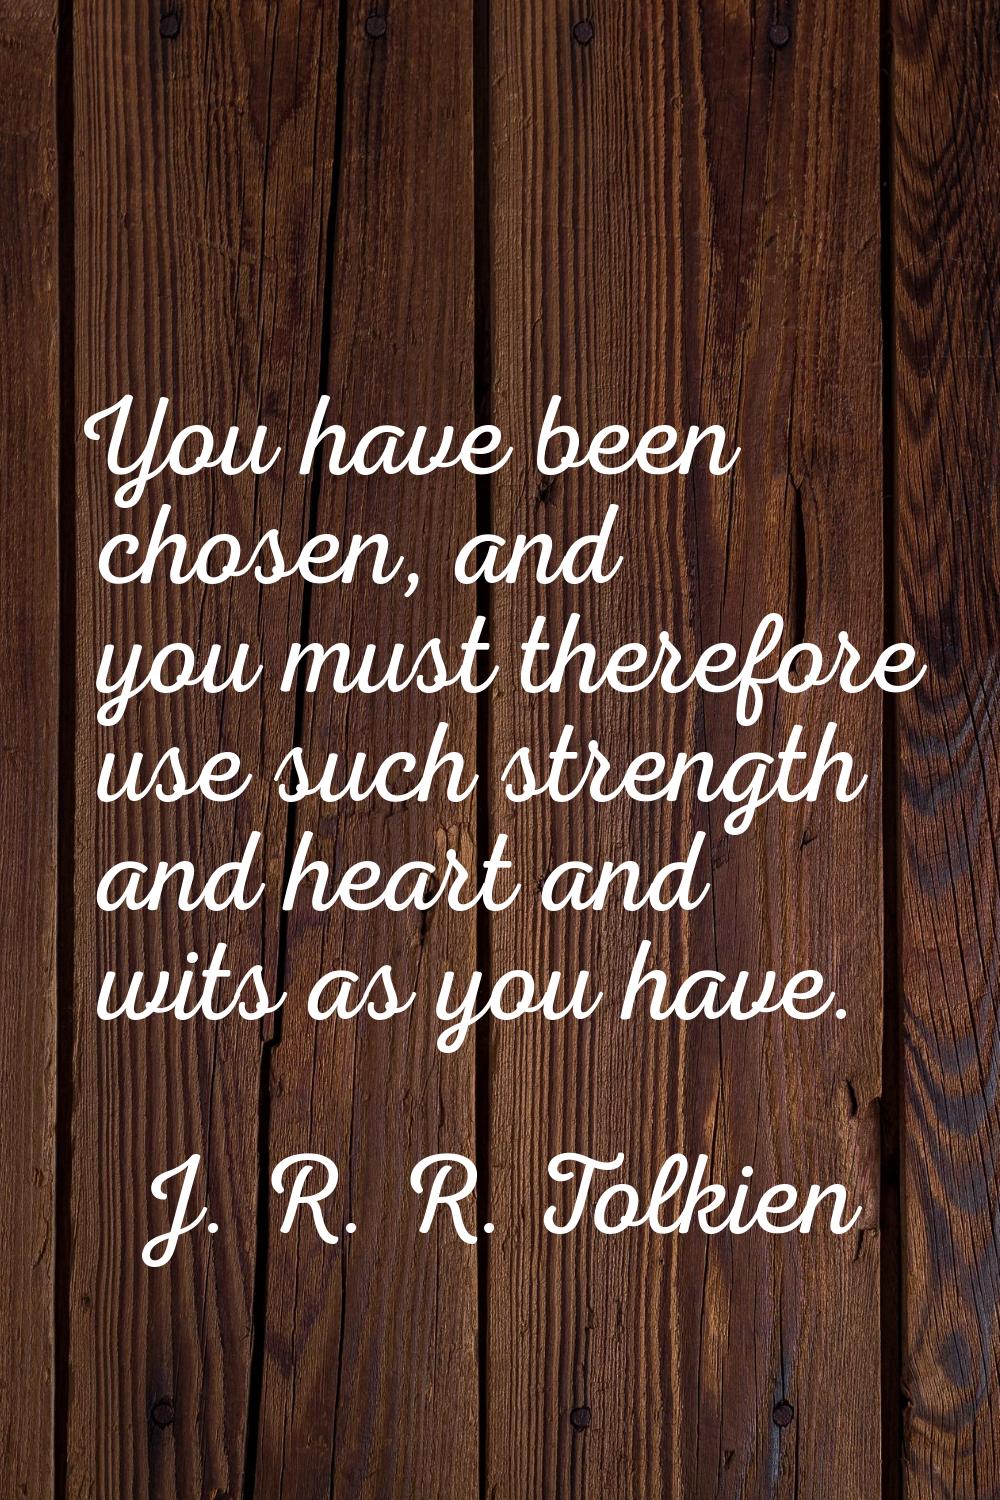 You have been chosen, and you must therefore use such strength and heart and wits as you have.